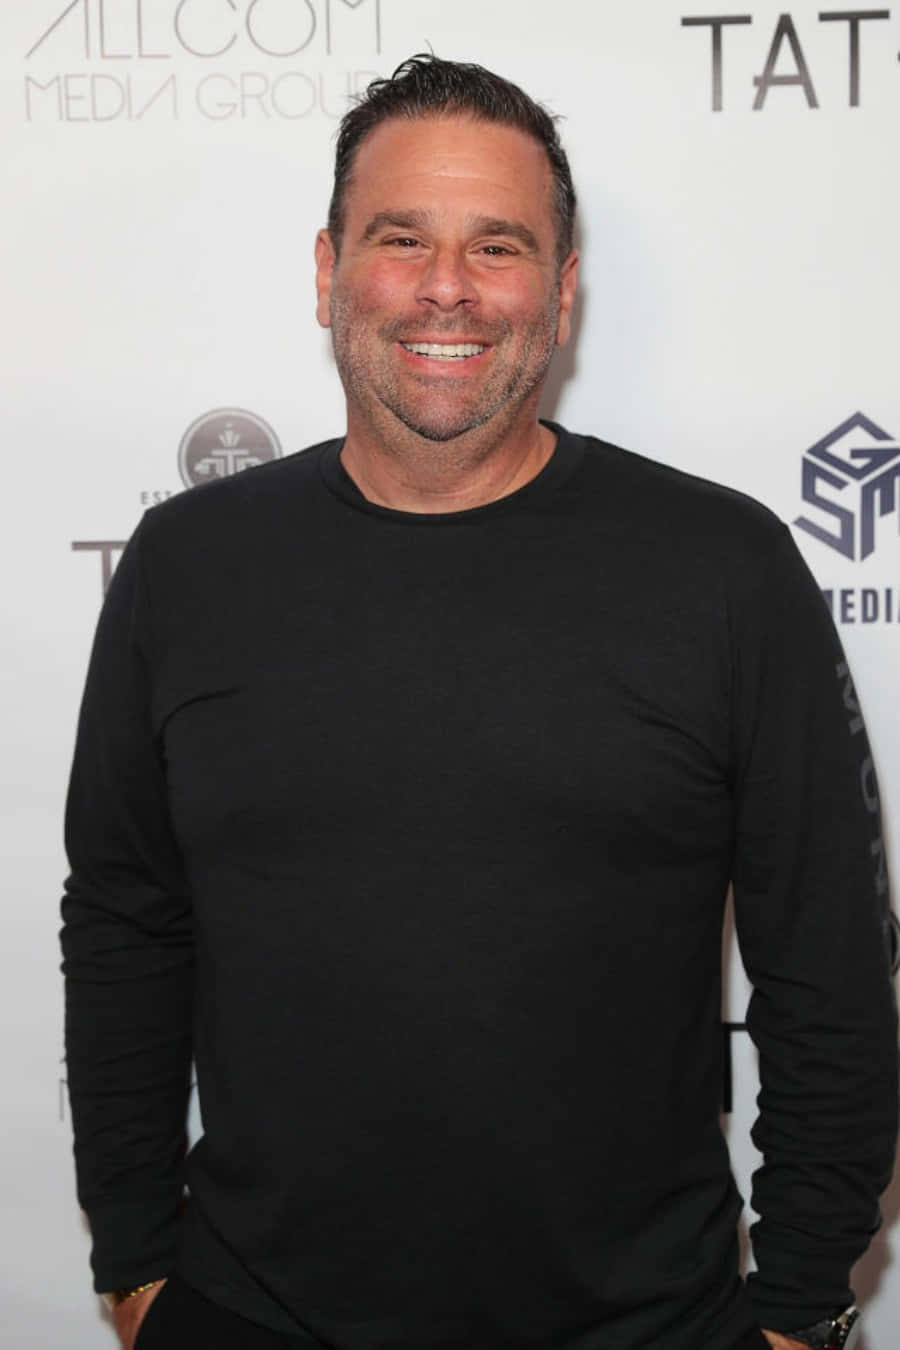 A Man In Black Shirt Smiling On The Red Carpet